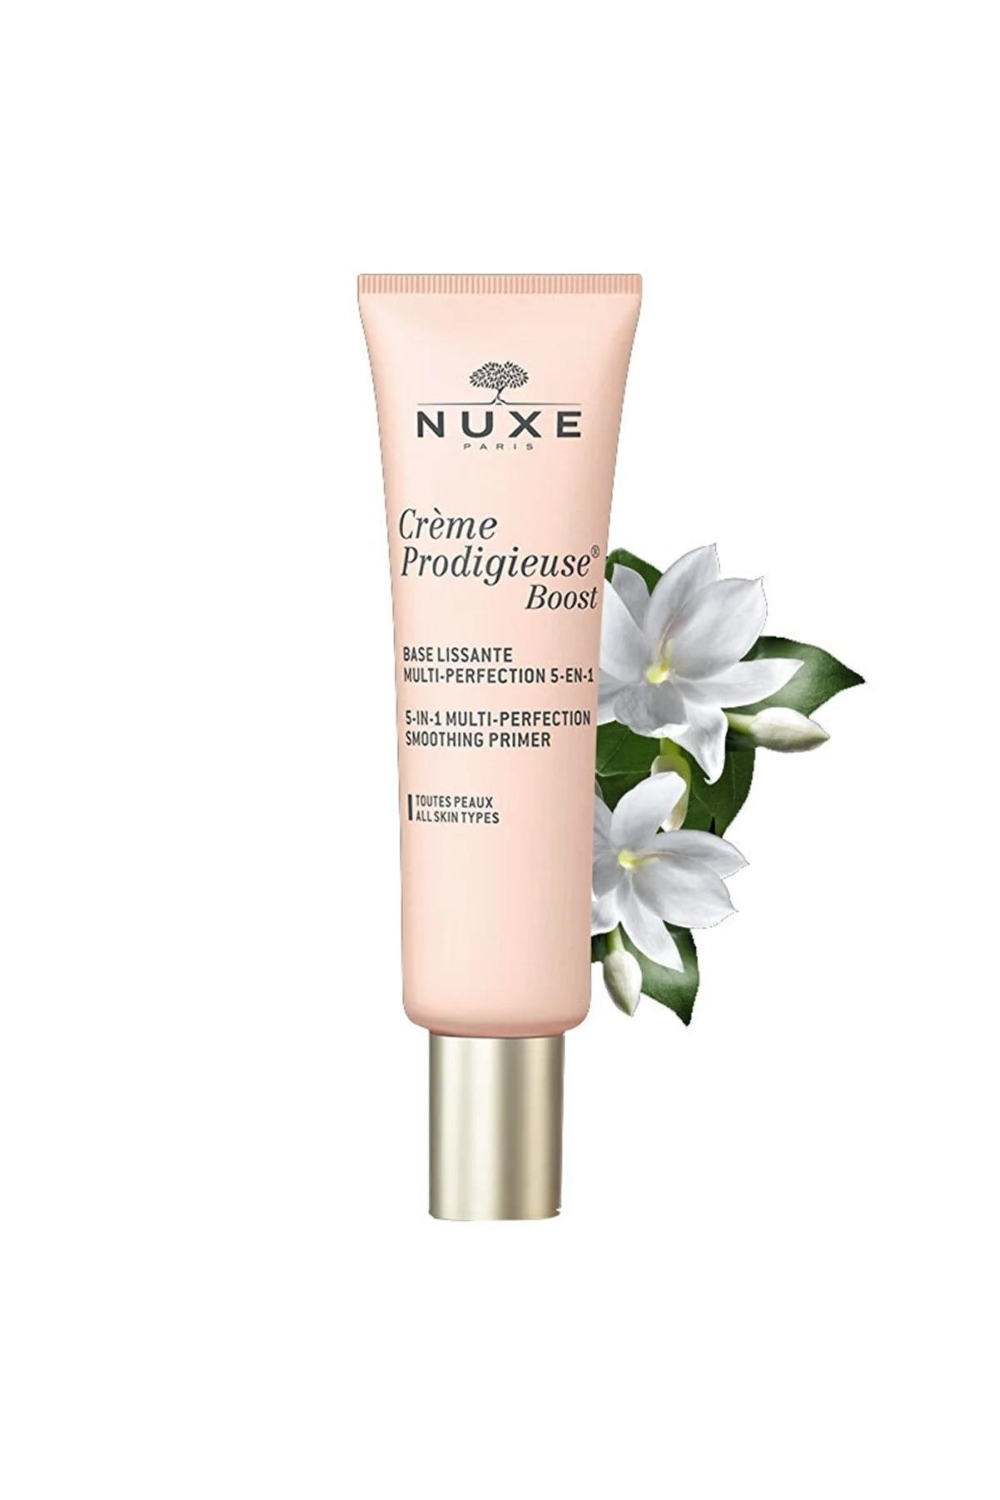 Nuxe Creme Prodigieuse Boost 5-in-1 Multi-Perfection Smoothing Primer 30 мл